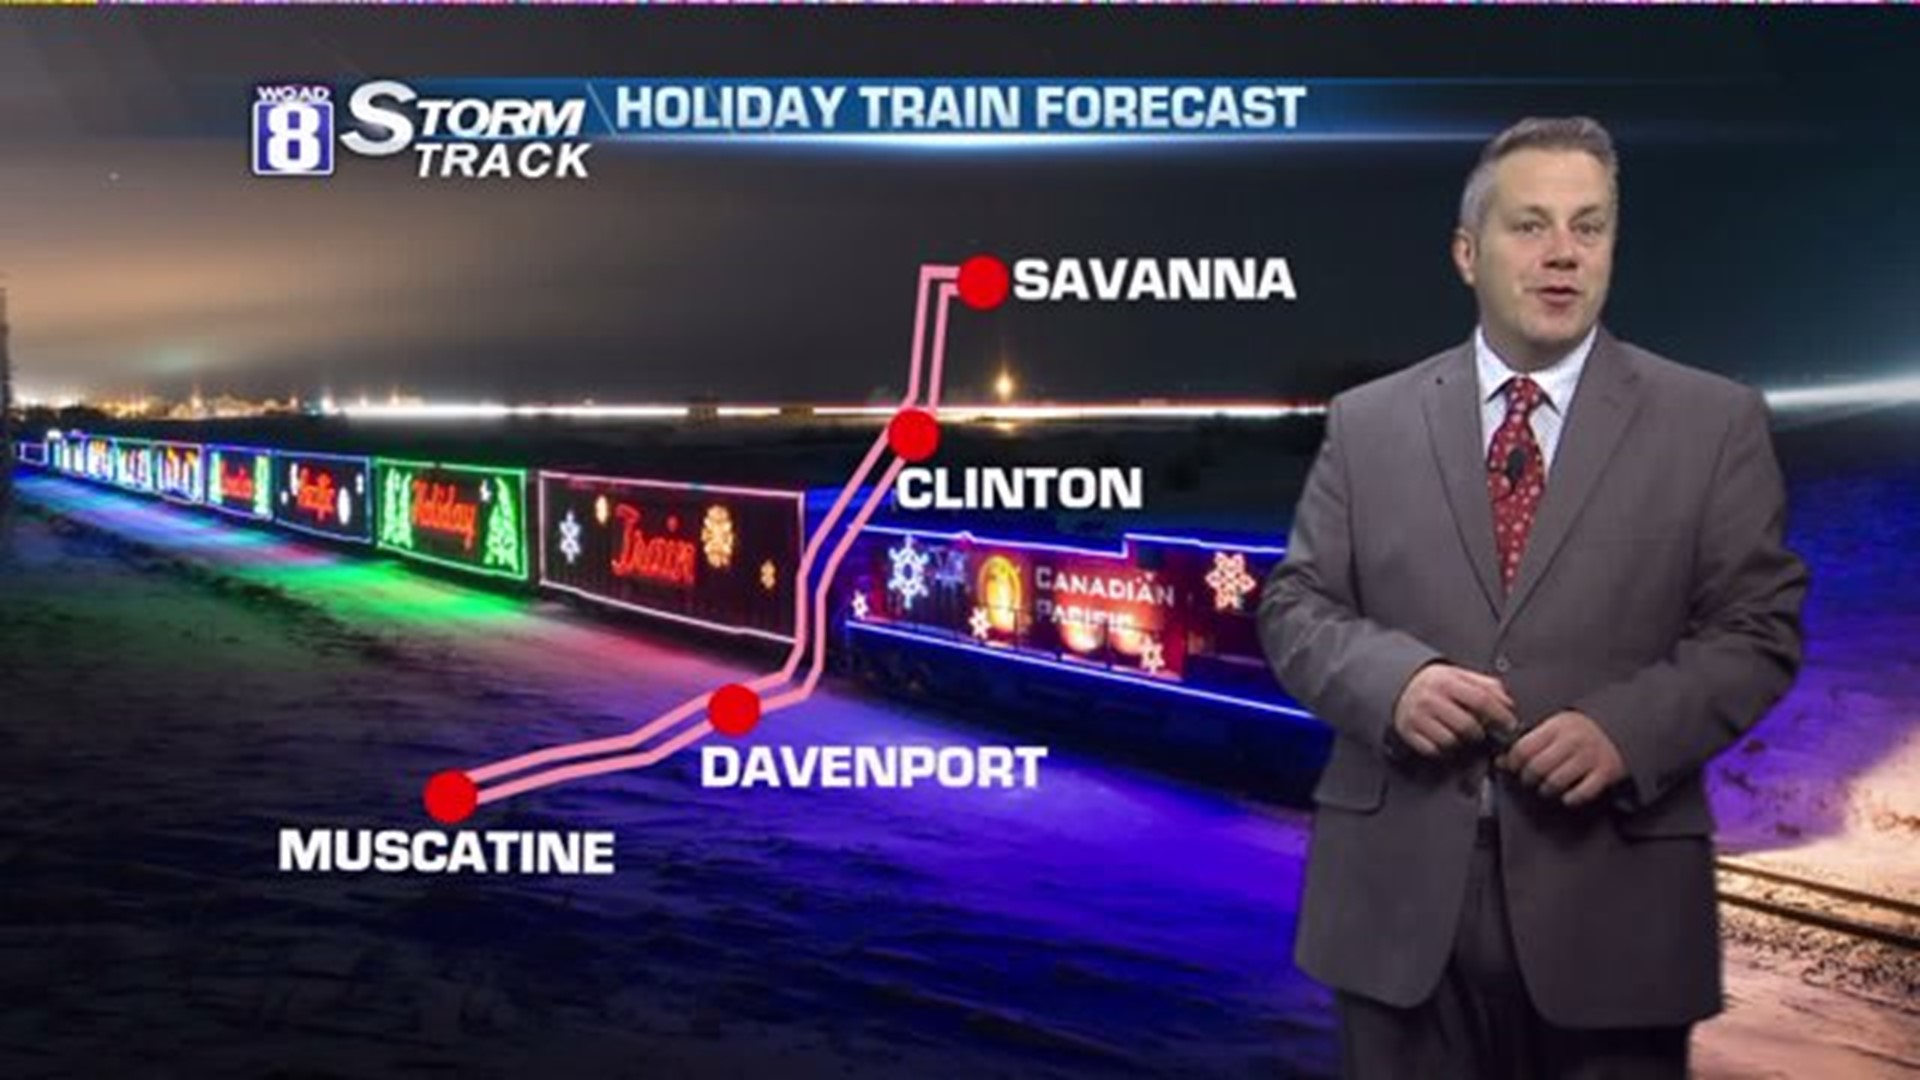 Eric is forecasting nice weather for the CP Holiday Train